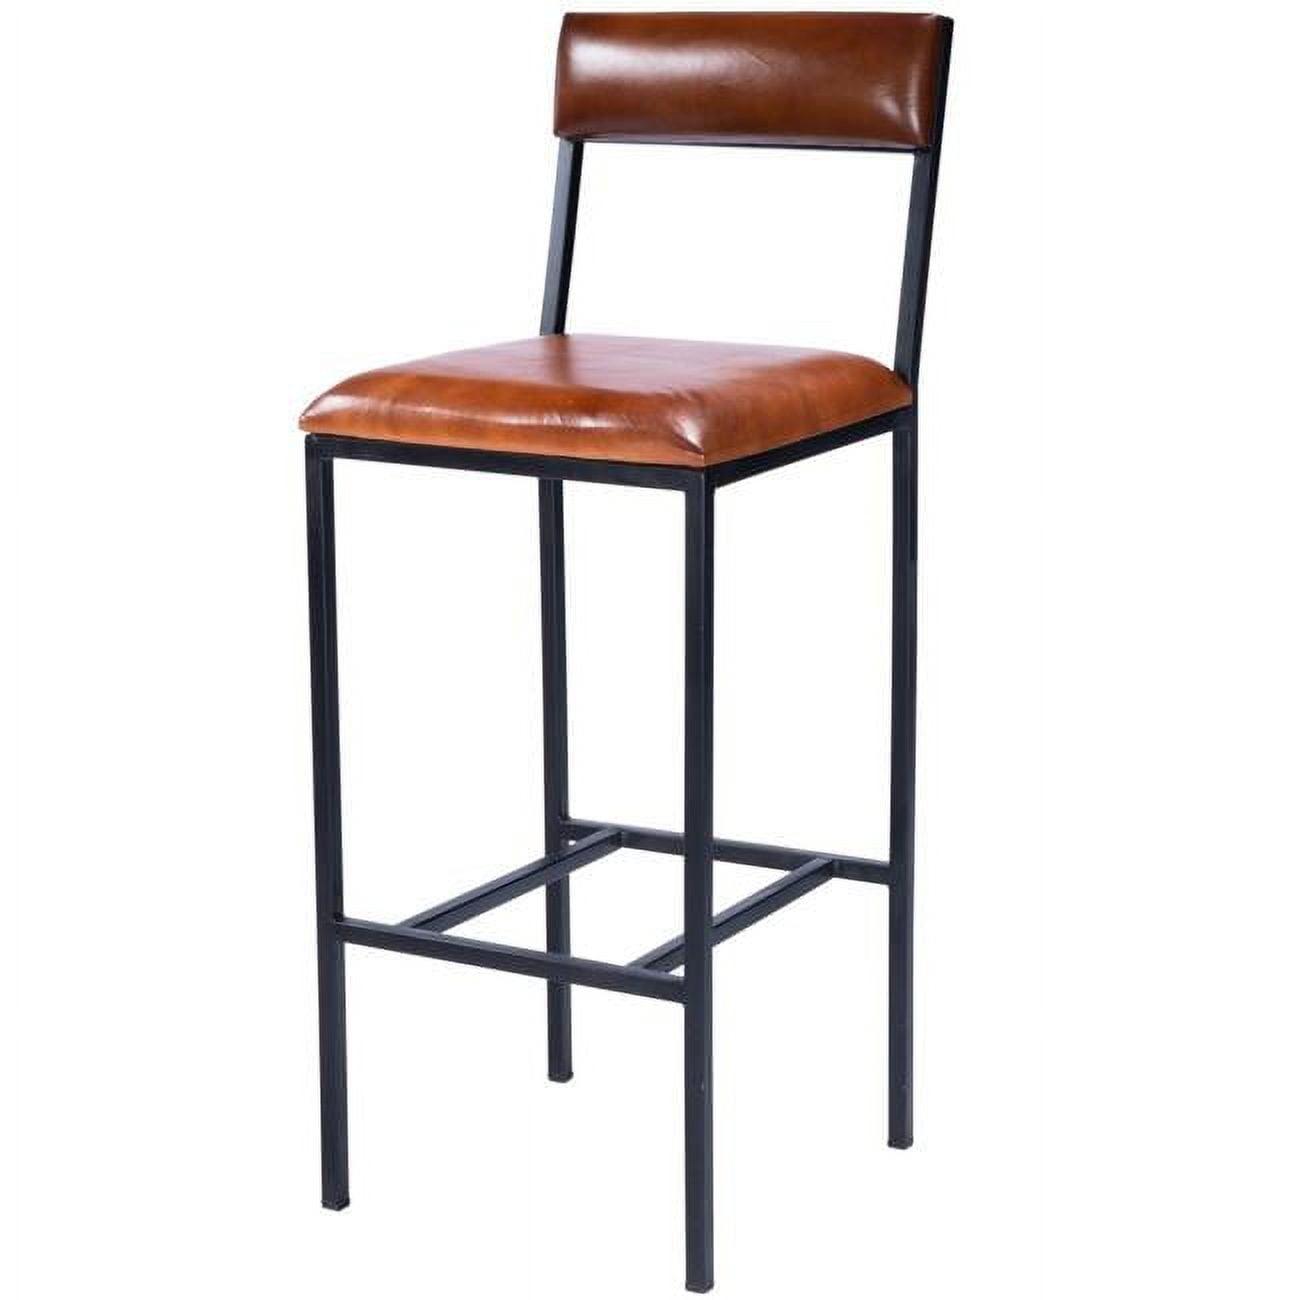 Classic Medium Brown Leather & Metal Bar Stool with Footrest